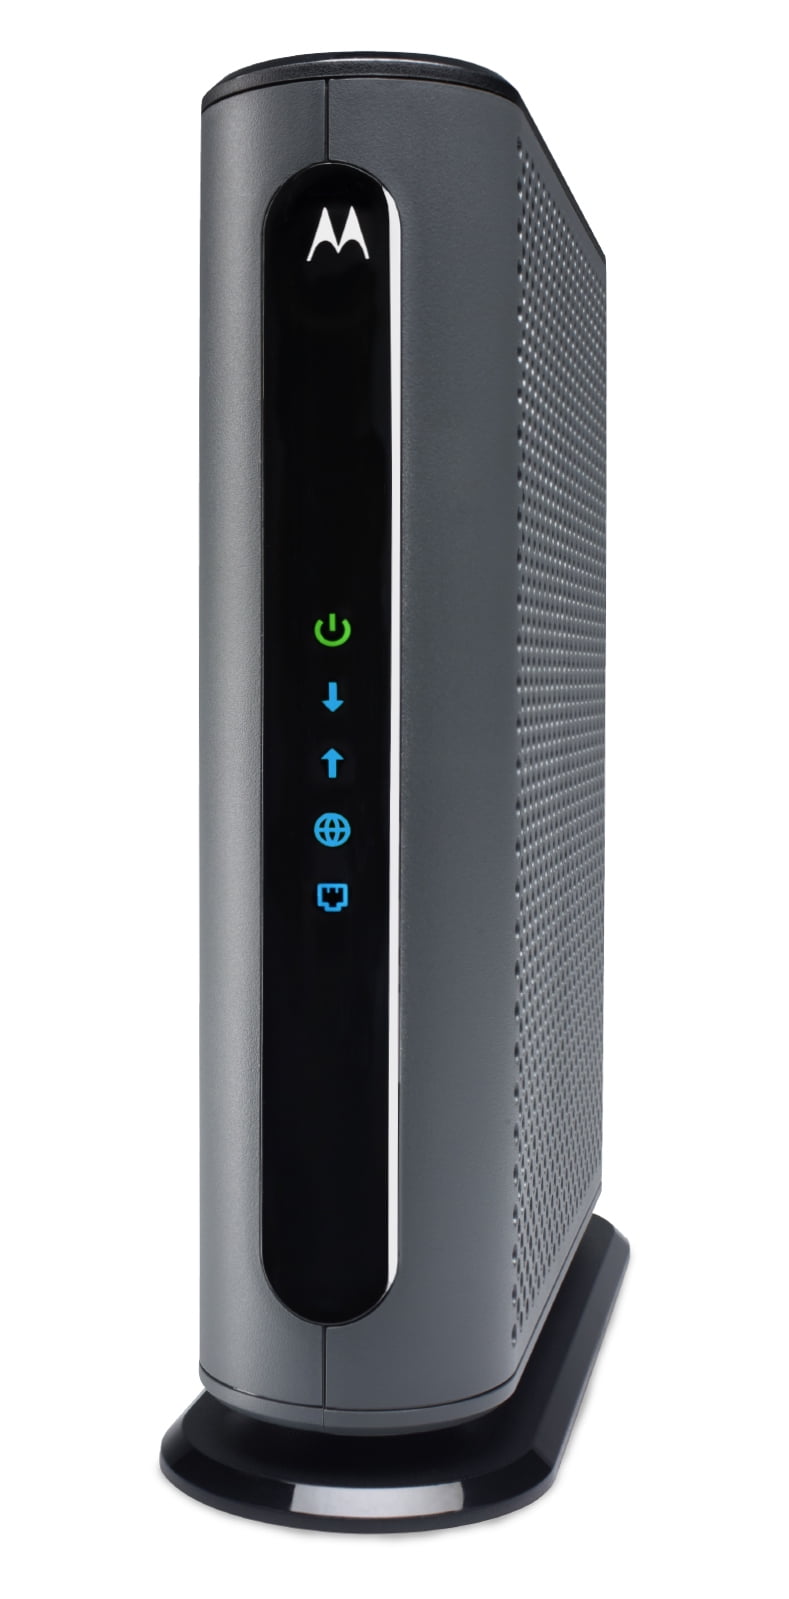 Approved for Comcast Xfinity Charter Spectrum AC2200 Smart Wi-Fi Router with Extended Range Top Tier Internet Speeds Separate Modem and Router Bundle Motorola MB8611 Cable Modem and Cox 